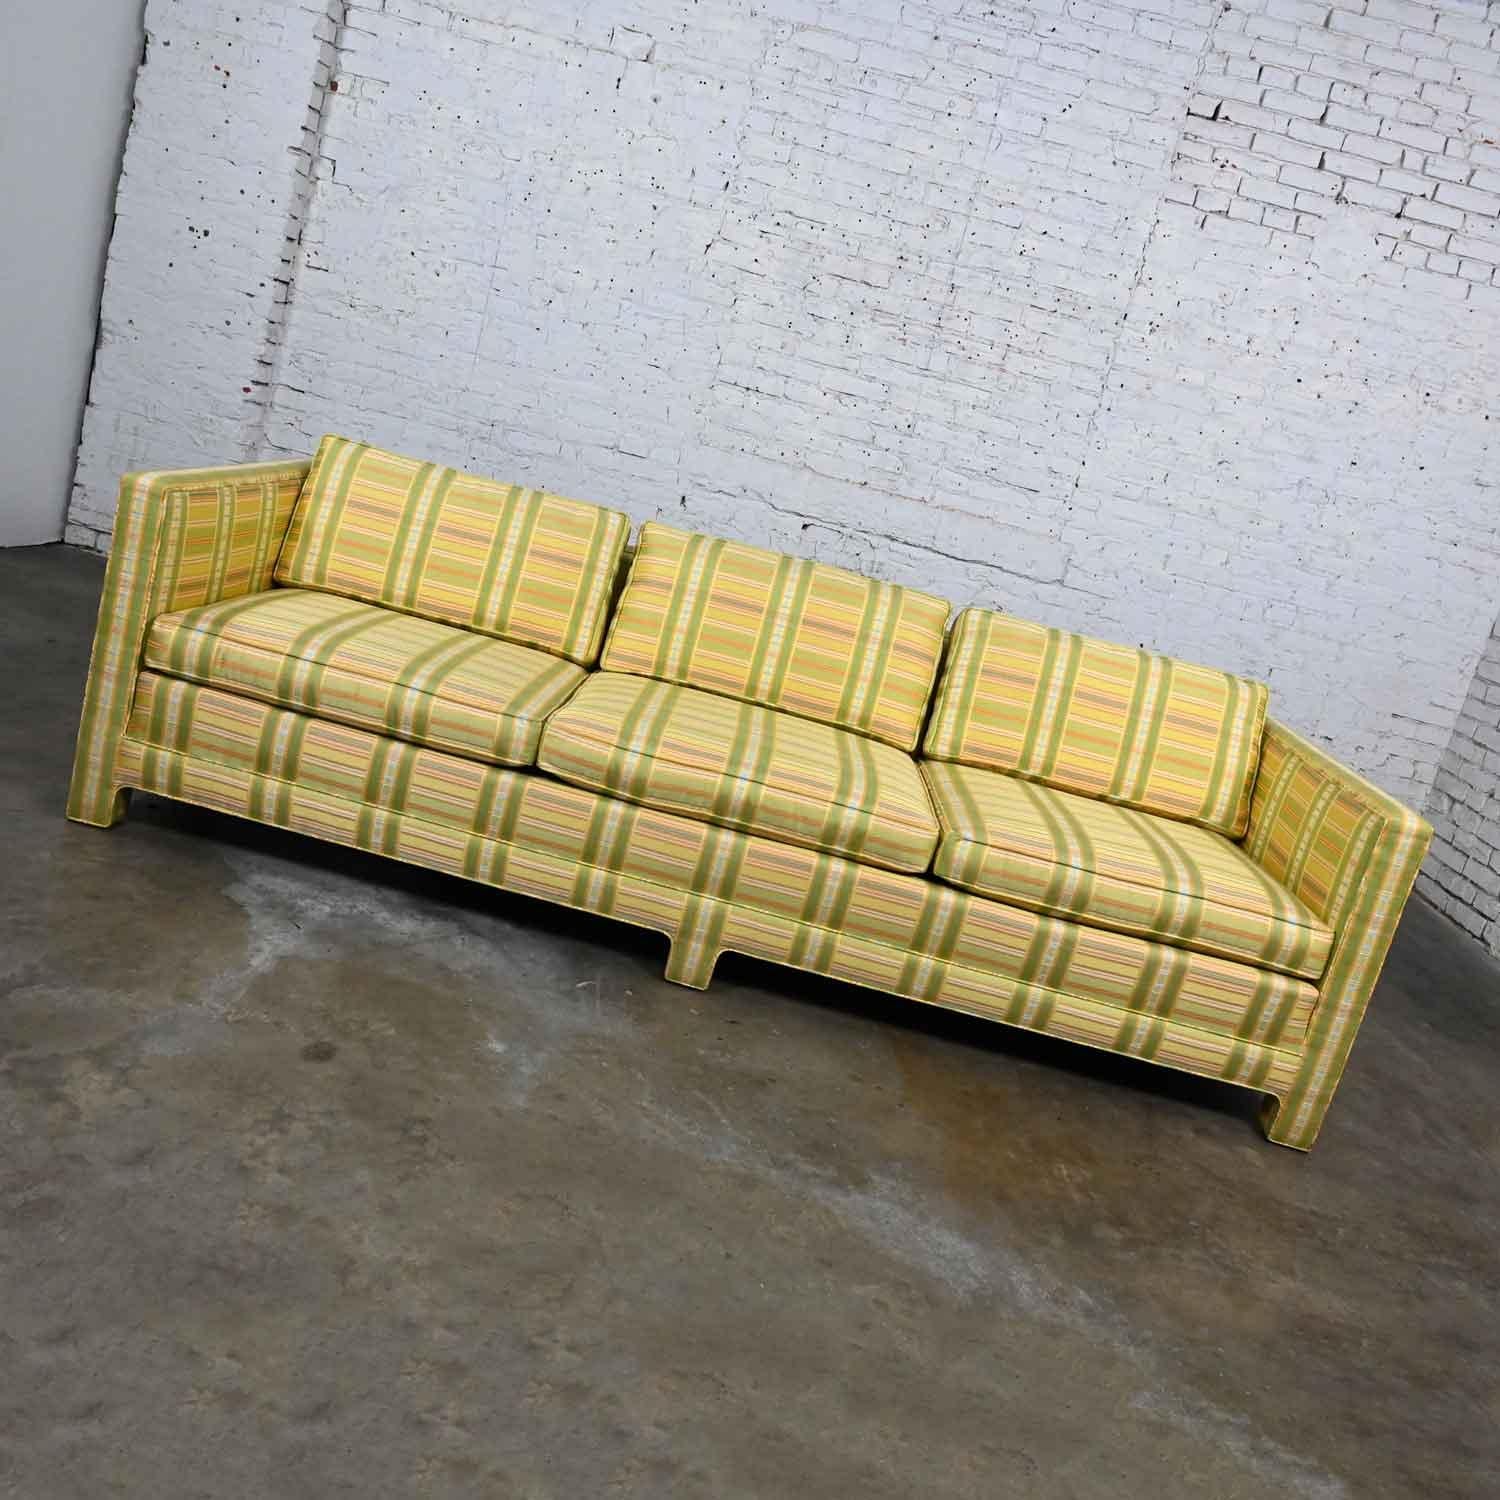 Gorgeous Mid-Century Modern (a.k.a. MCM) to modern tuxedo sofa by Henredon comprised of a fully upholstered frame including three loose seat & three loose back cushions wearing the original yellow and chartreuse with a touch of orange plaid fabric.